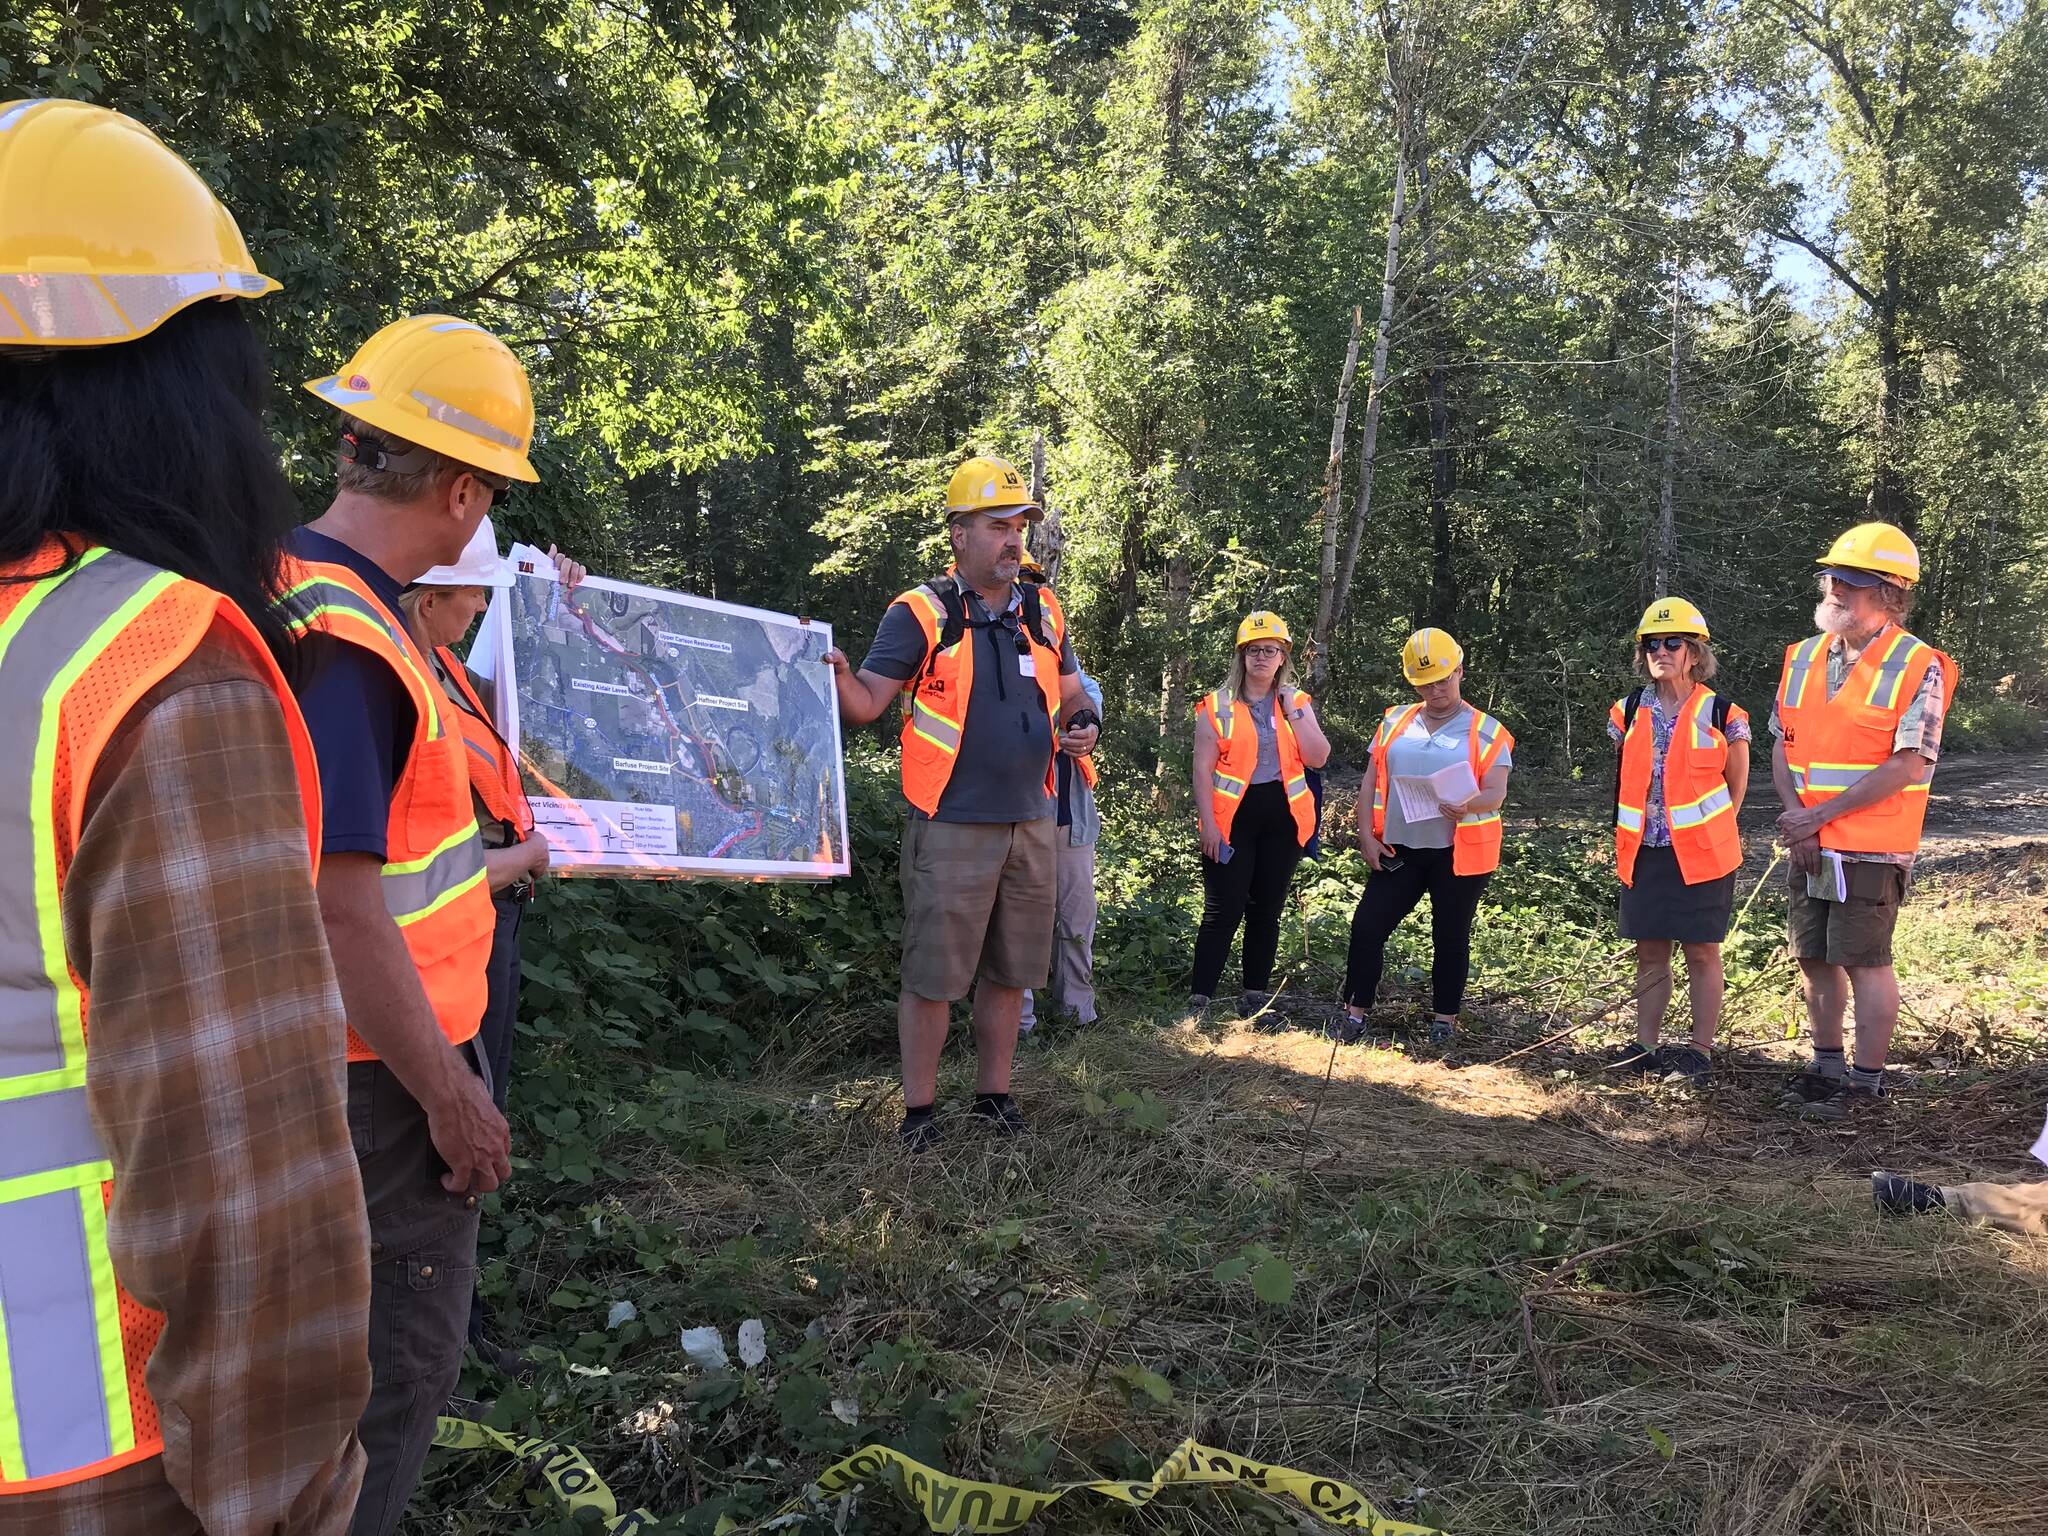 (Photo courtesy of Elissa Ostergaard)
Forum members leading a tour of the Fall City Floodplain Restoration Project in 2022.